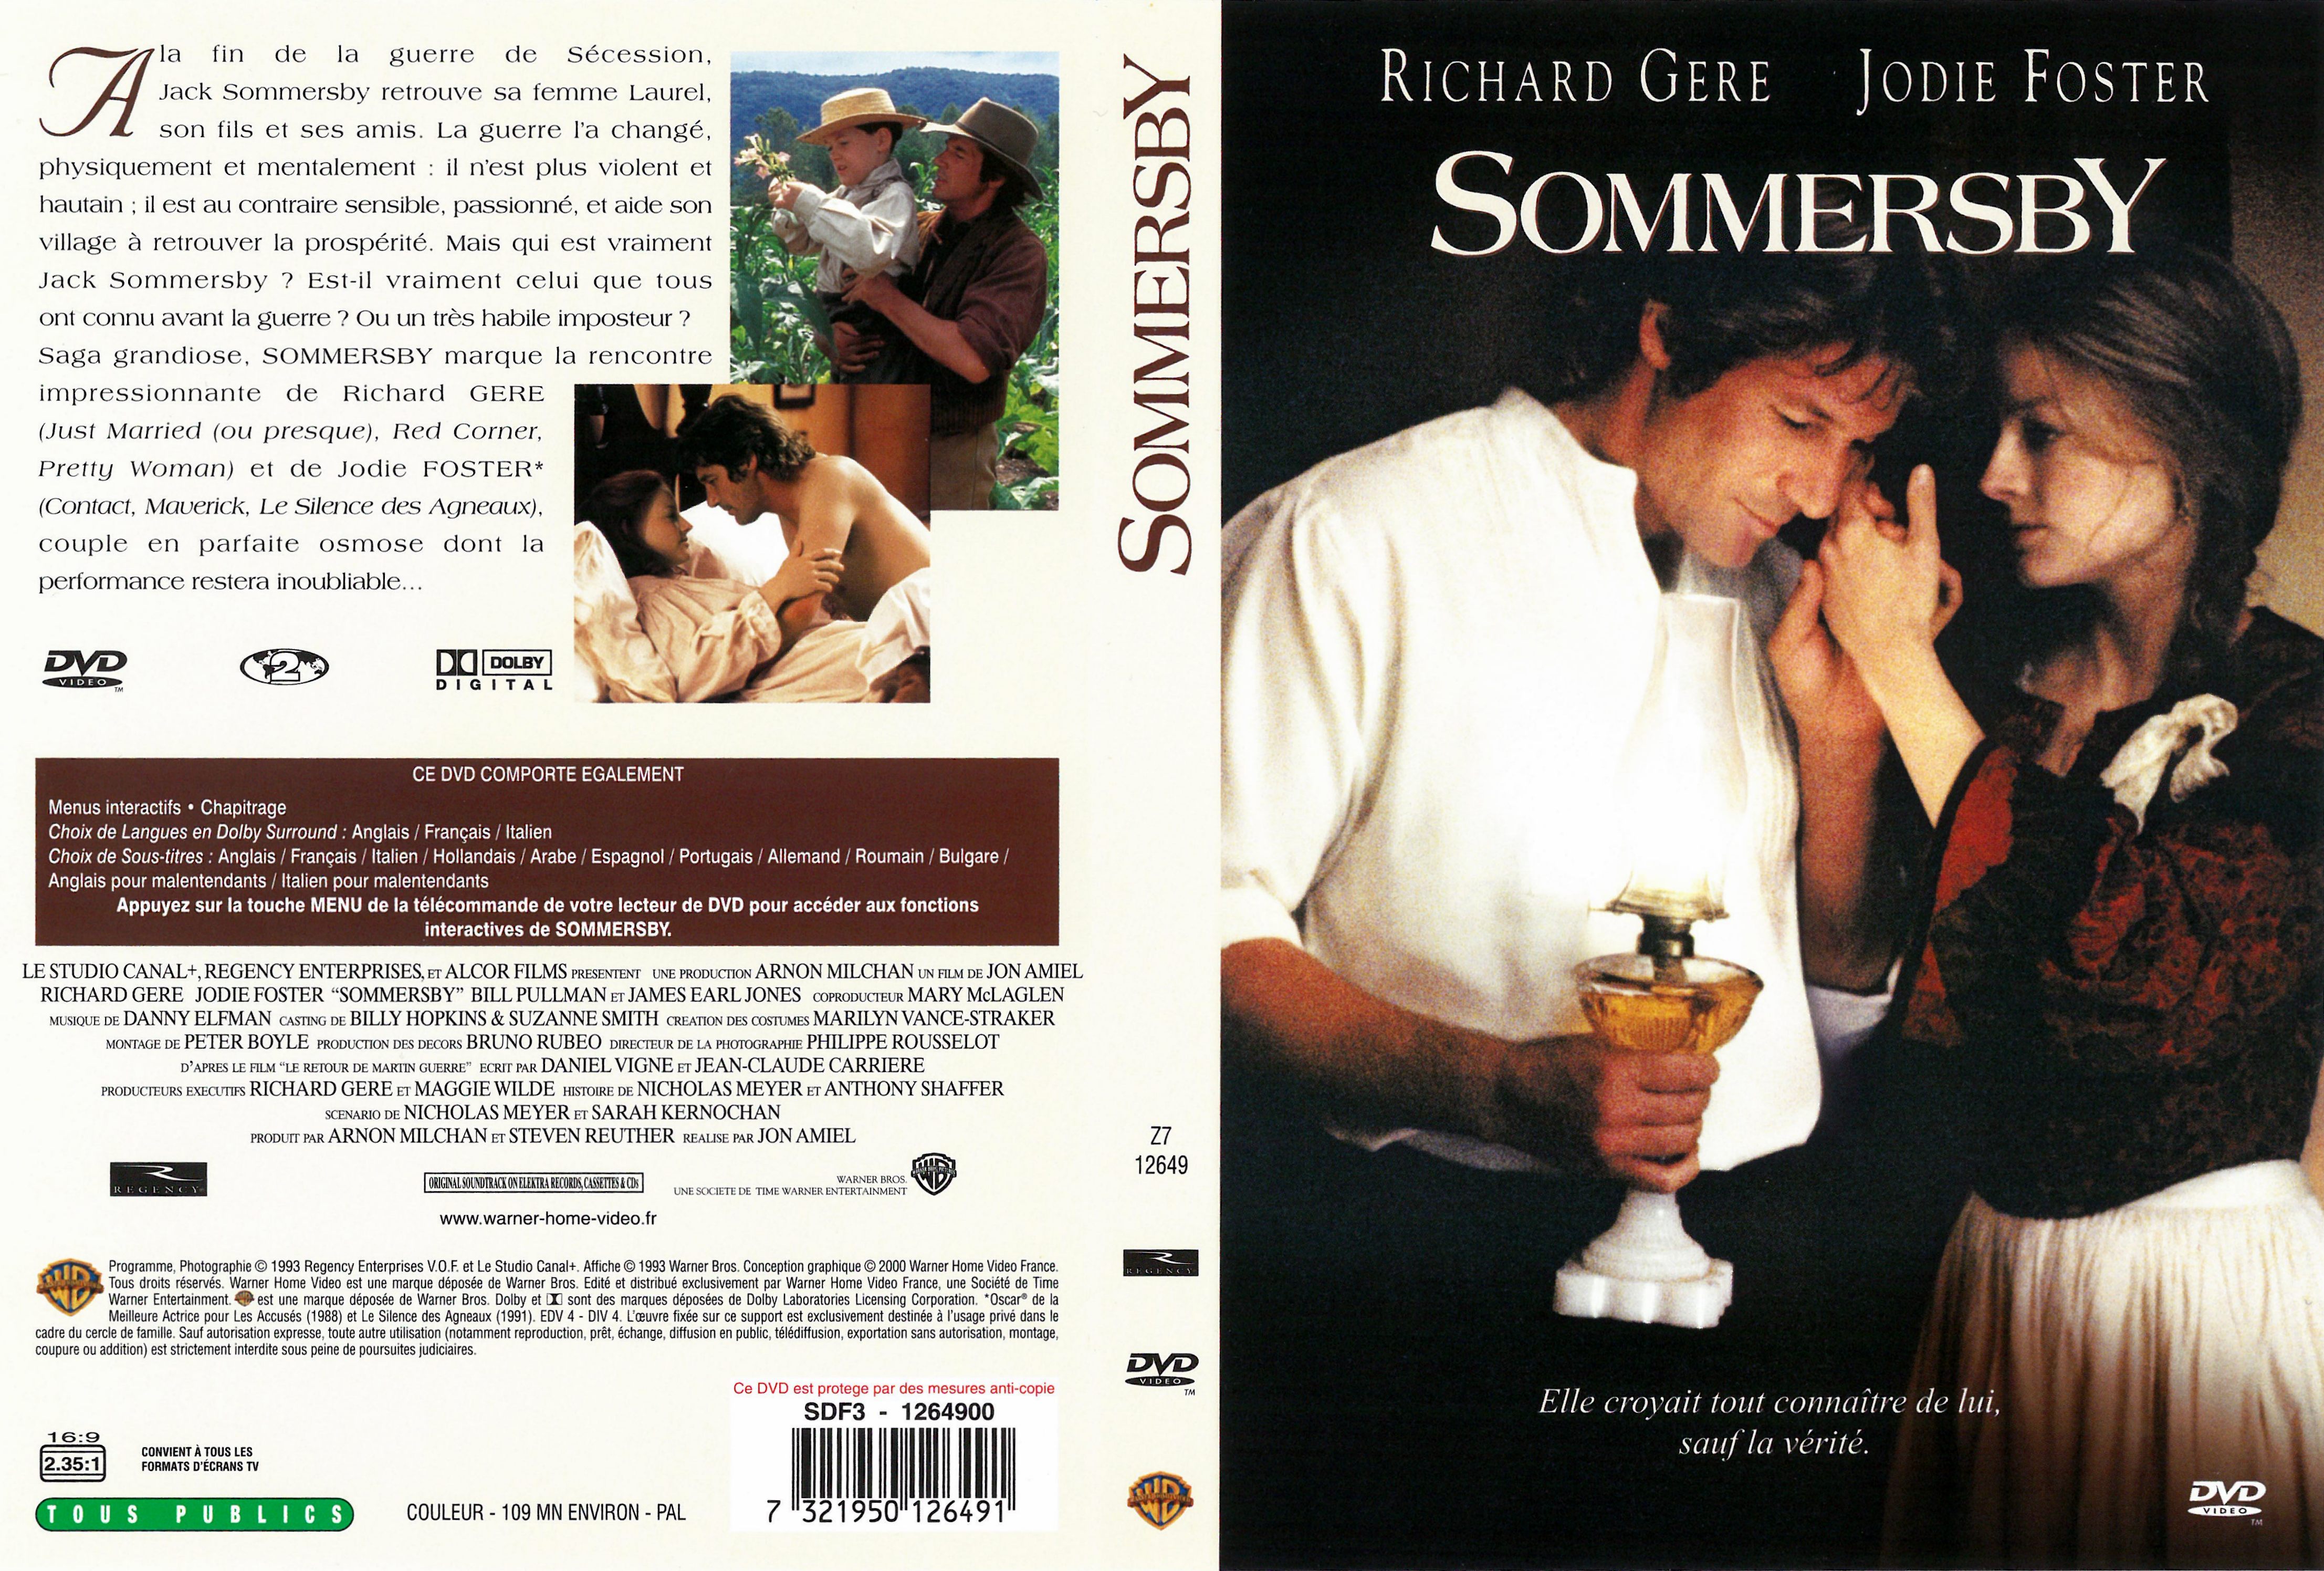 Jaquette DVD Sommersby v2